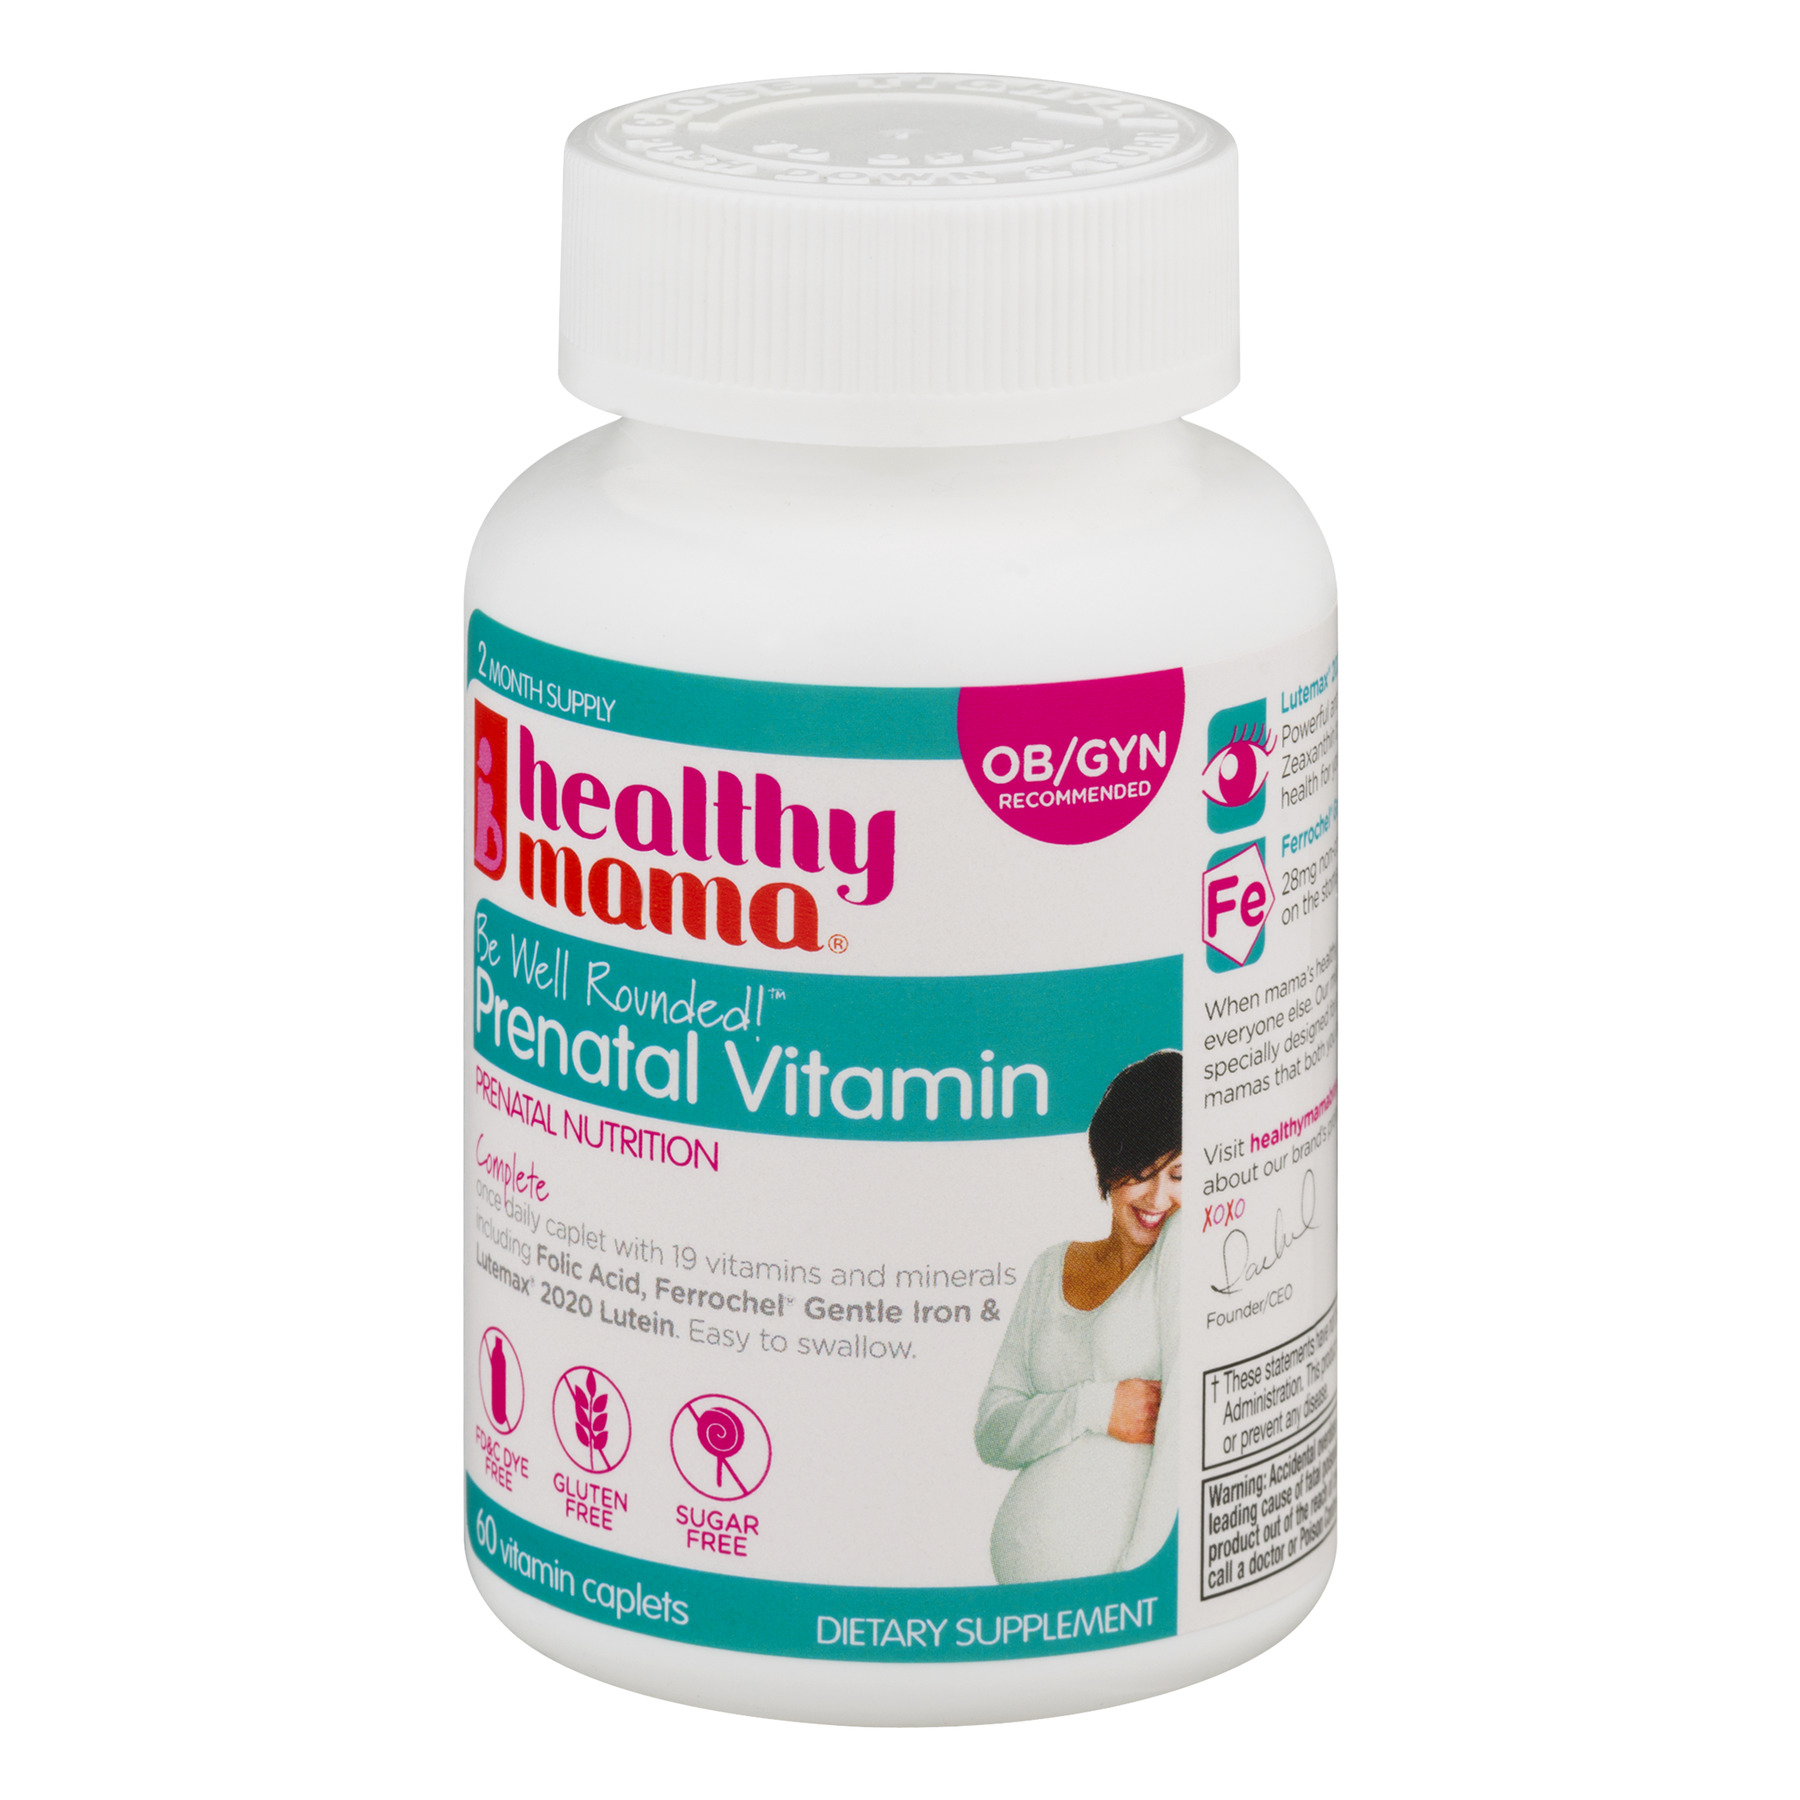 Healthy Mama Be Well Rounded! Prenatal Vitamins, 60 Count - image 3 of 6